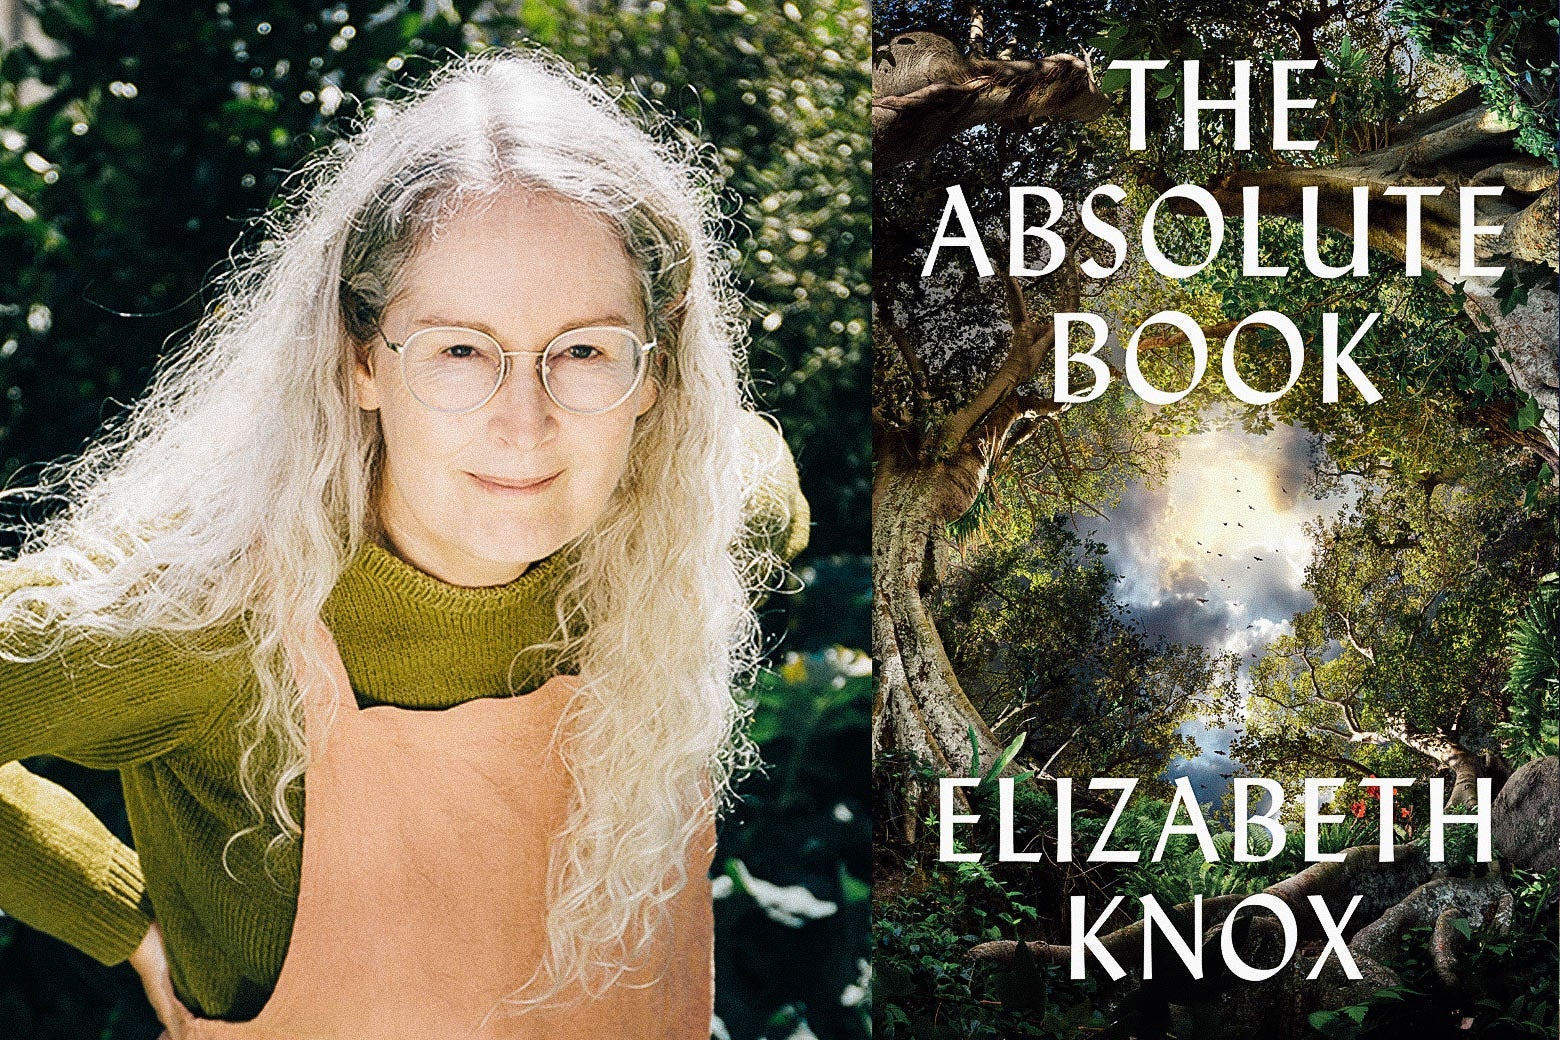 The author Elizabeth Knox and her book The Absolute Book.